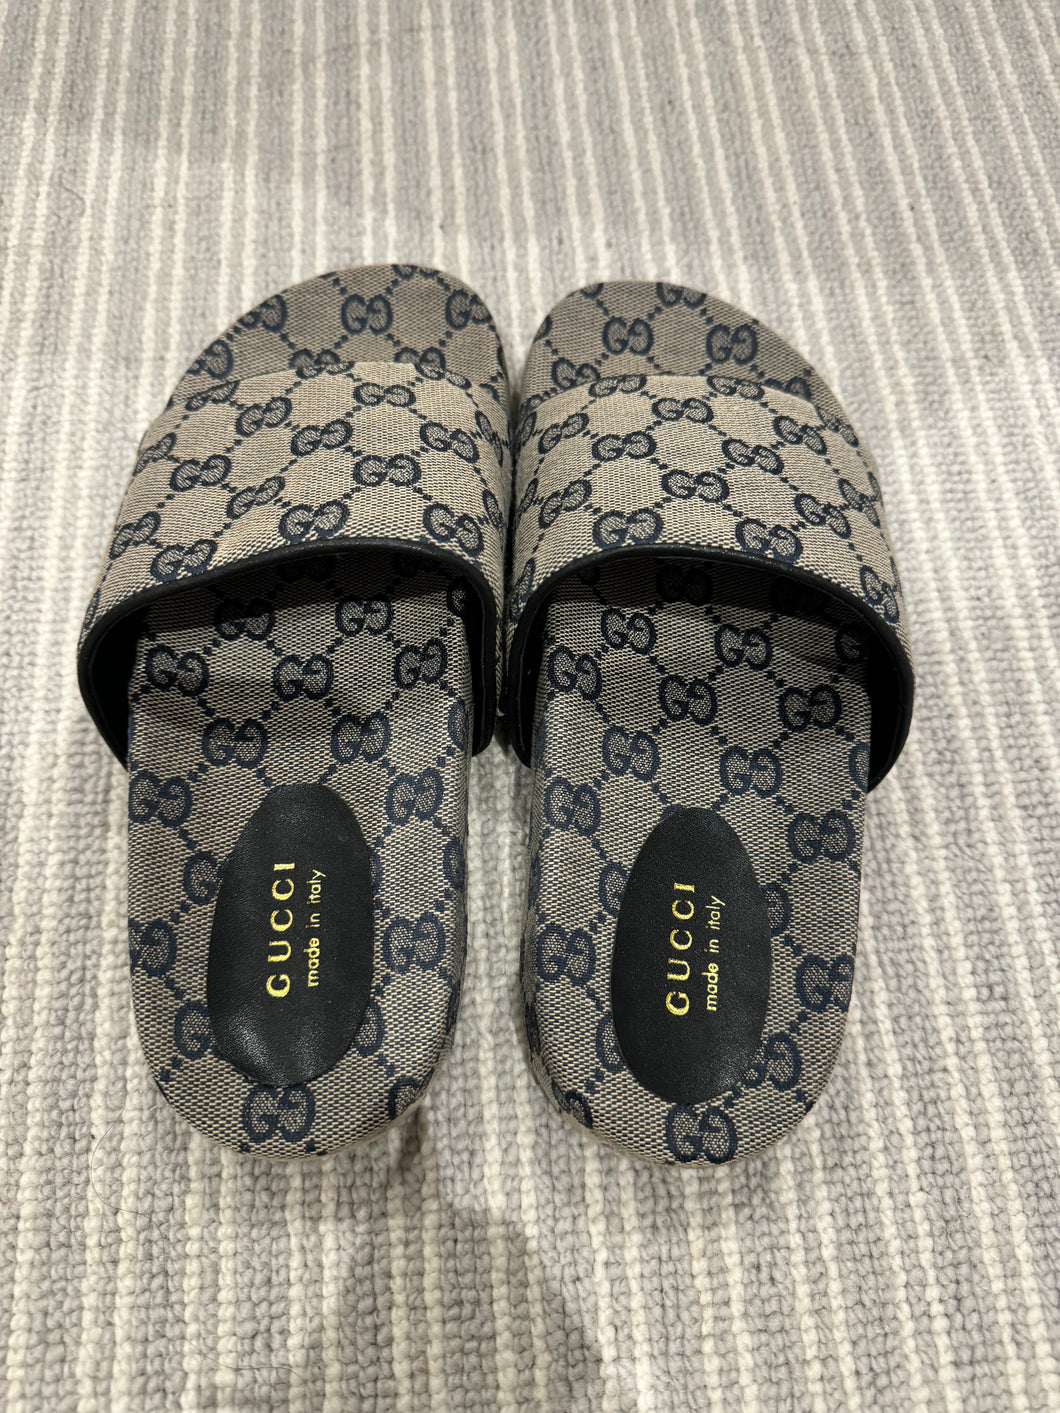 Success & Wealth Gucci Sliders For Career, Money, Achieving Dreams & Life Goals Law of Attraction UK Size 4 // EU 37 // US 6.5